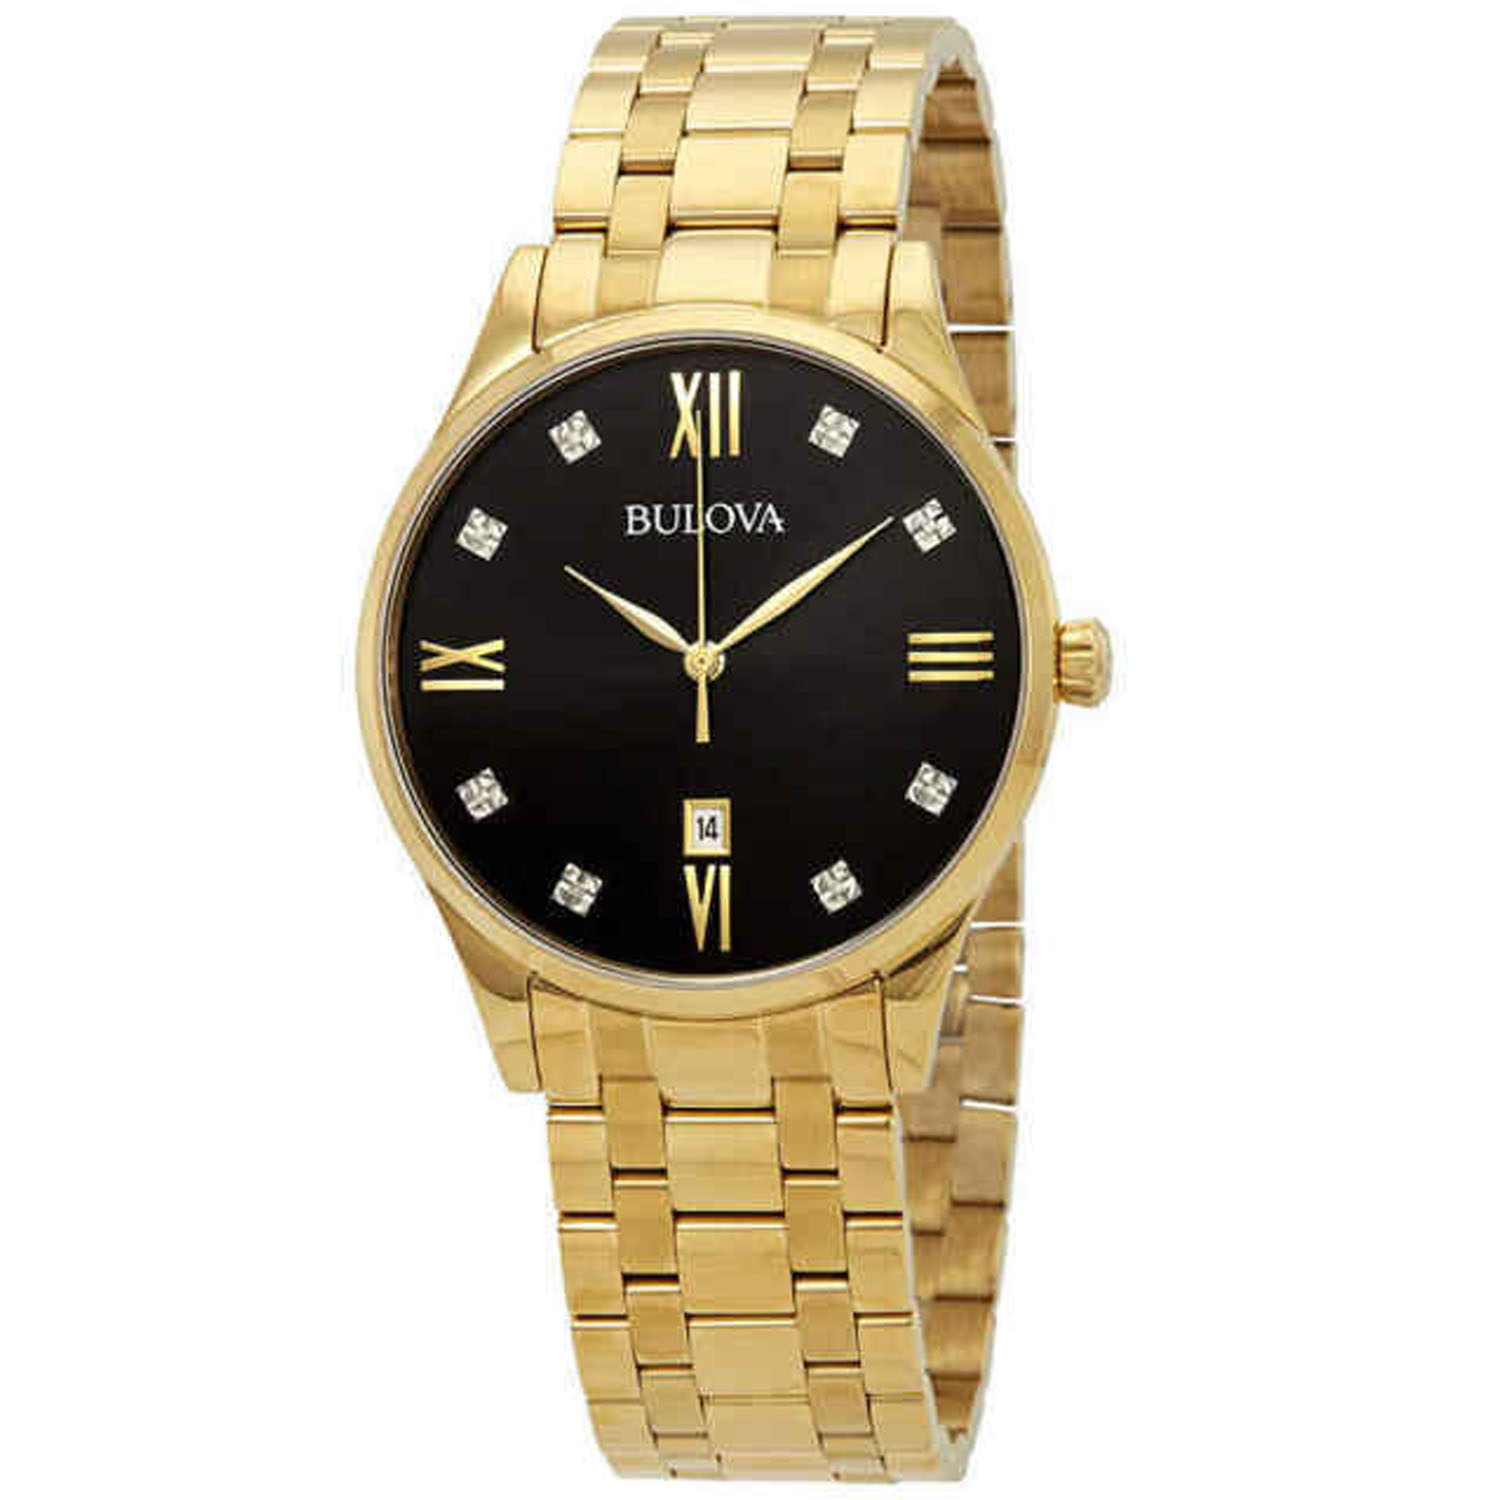 Bulova Gold-Tone Stainless Steel Mens Watch 97D108